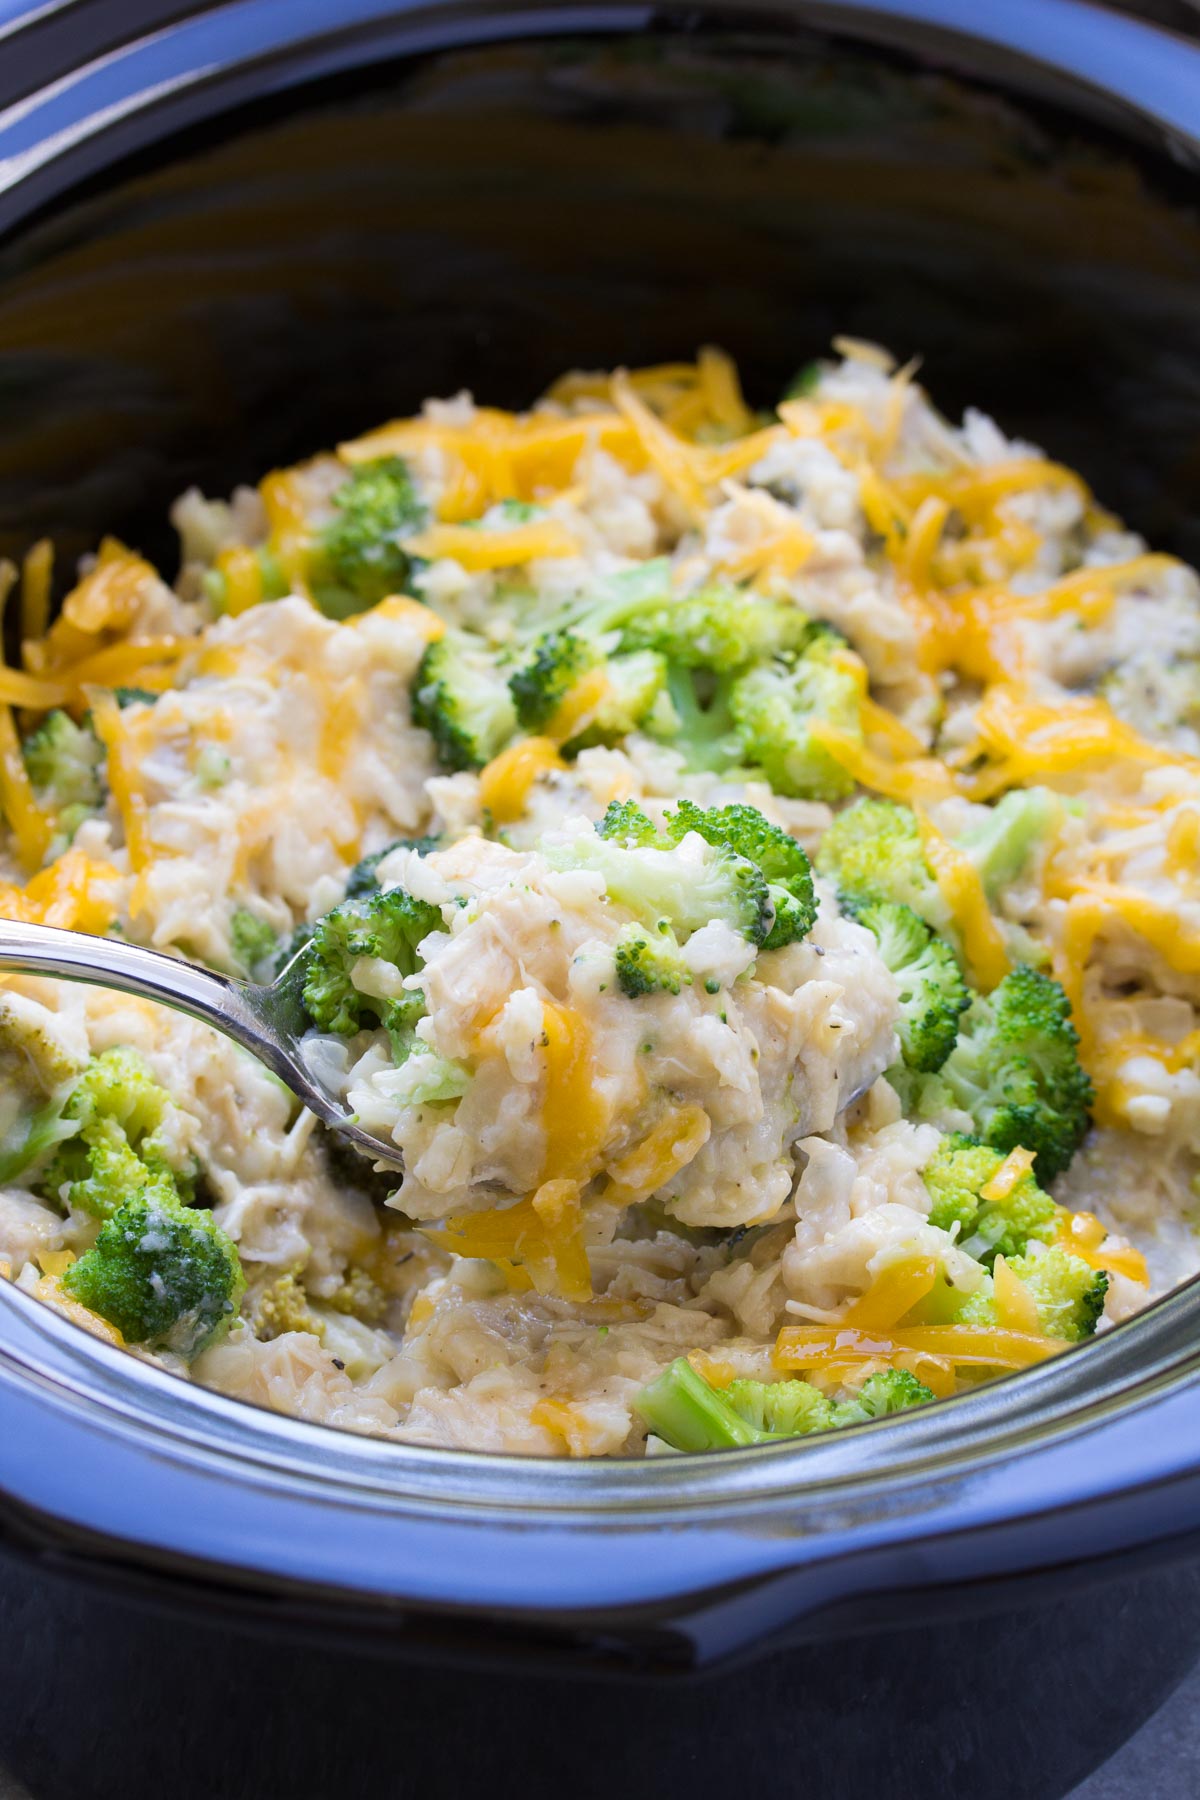 Slow Cooker Chicken Broccoli And Rice Casserole,Salmon On The Grill In Foil